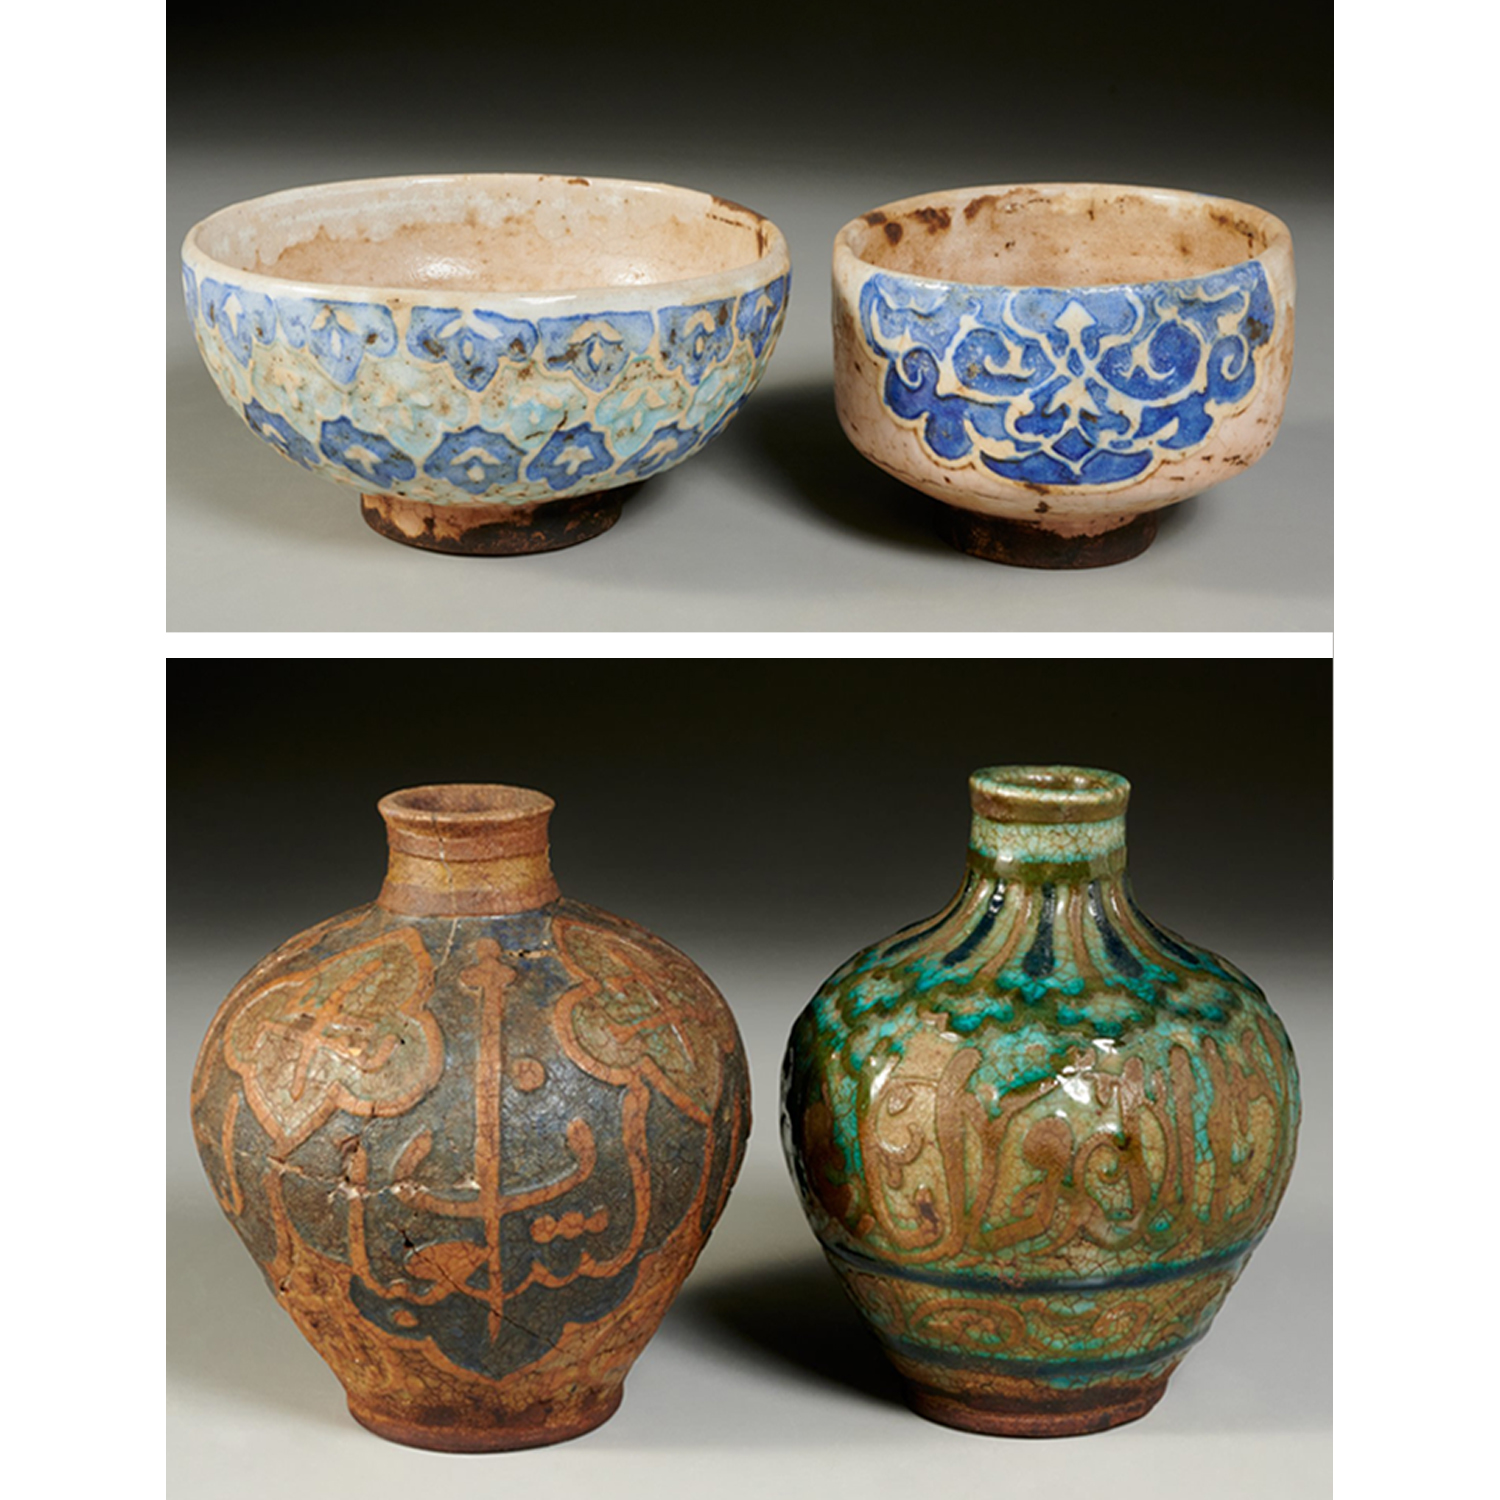  4 PERSIAN POTTERY BOWLS AND VASES 2bf5ec